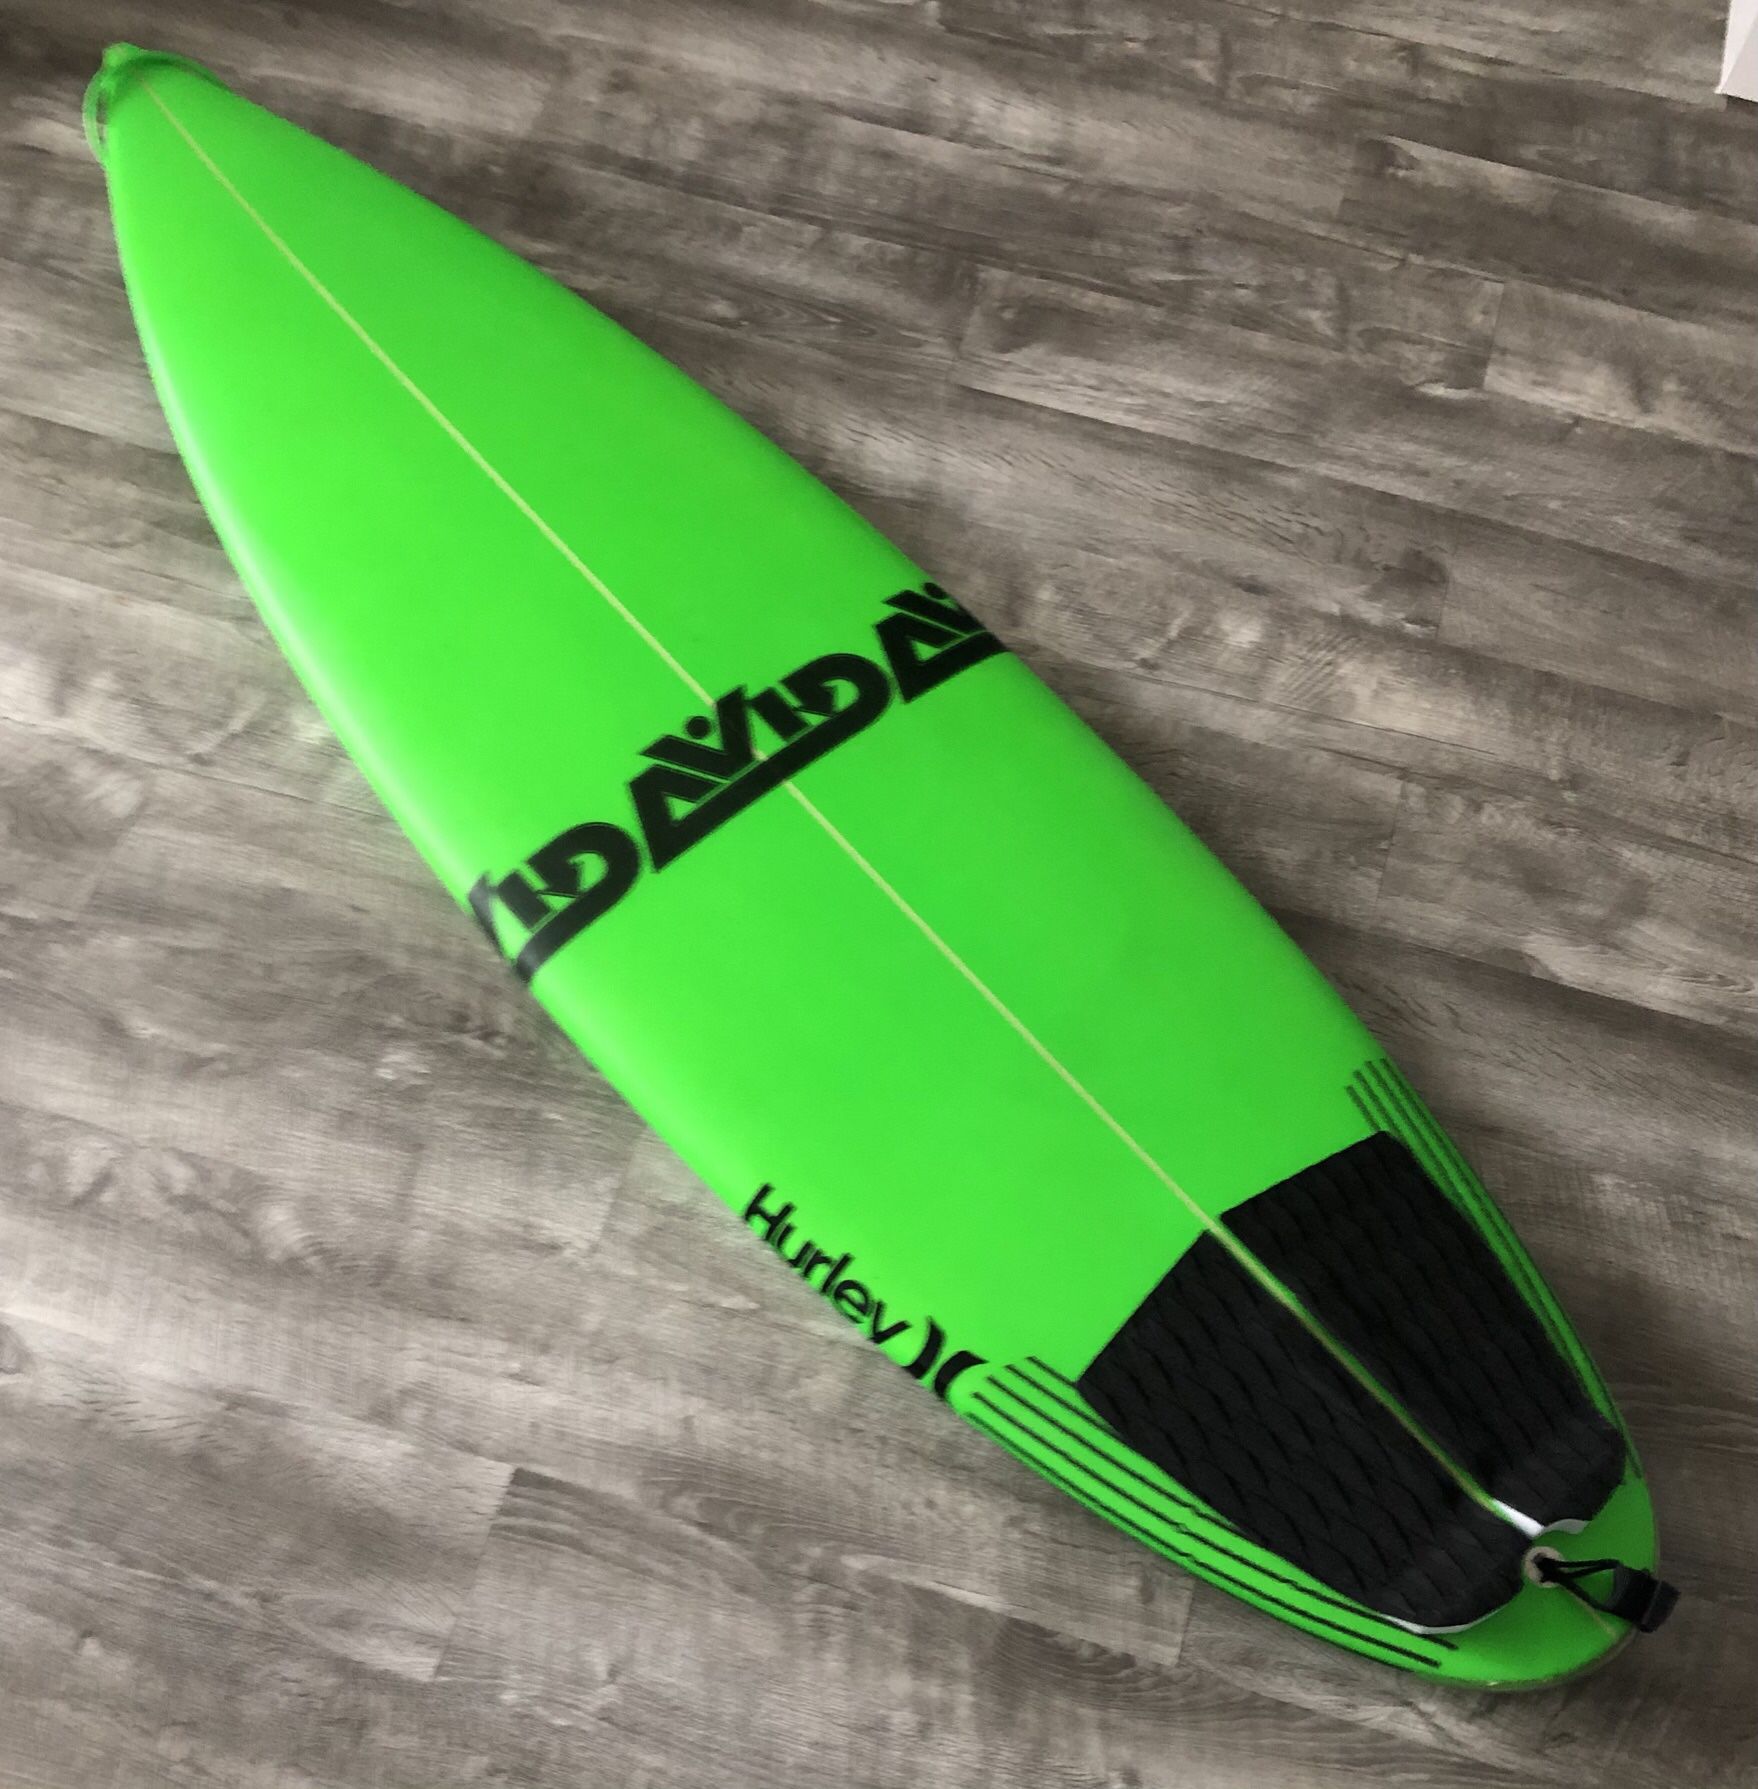 Surfboard 5’9 28.3 liters Roundtail Futures Fin Box 5 Fin Optional New! Jobs Beach, Puerto Rico